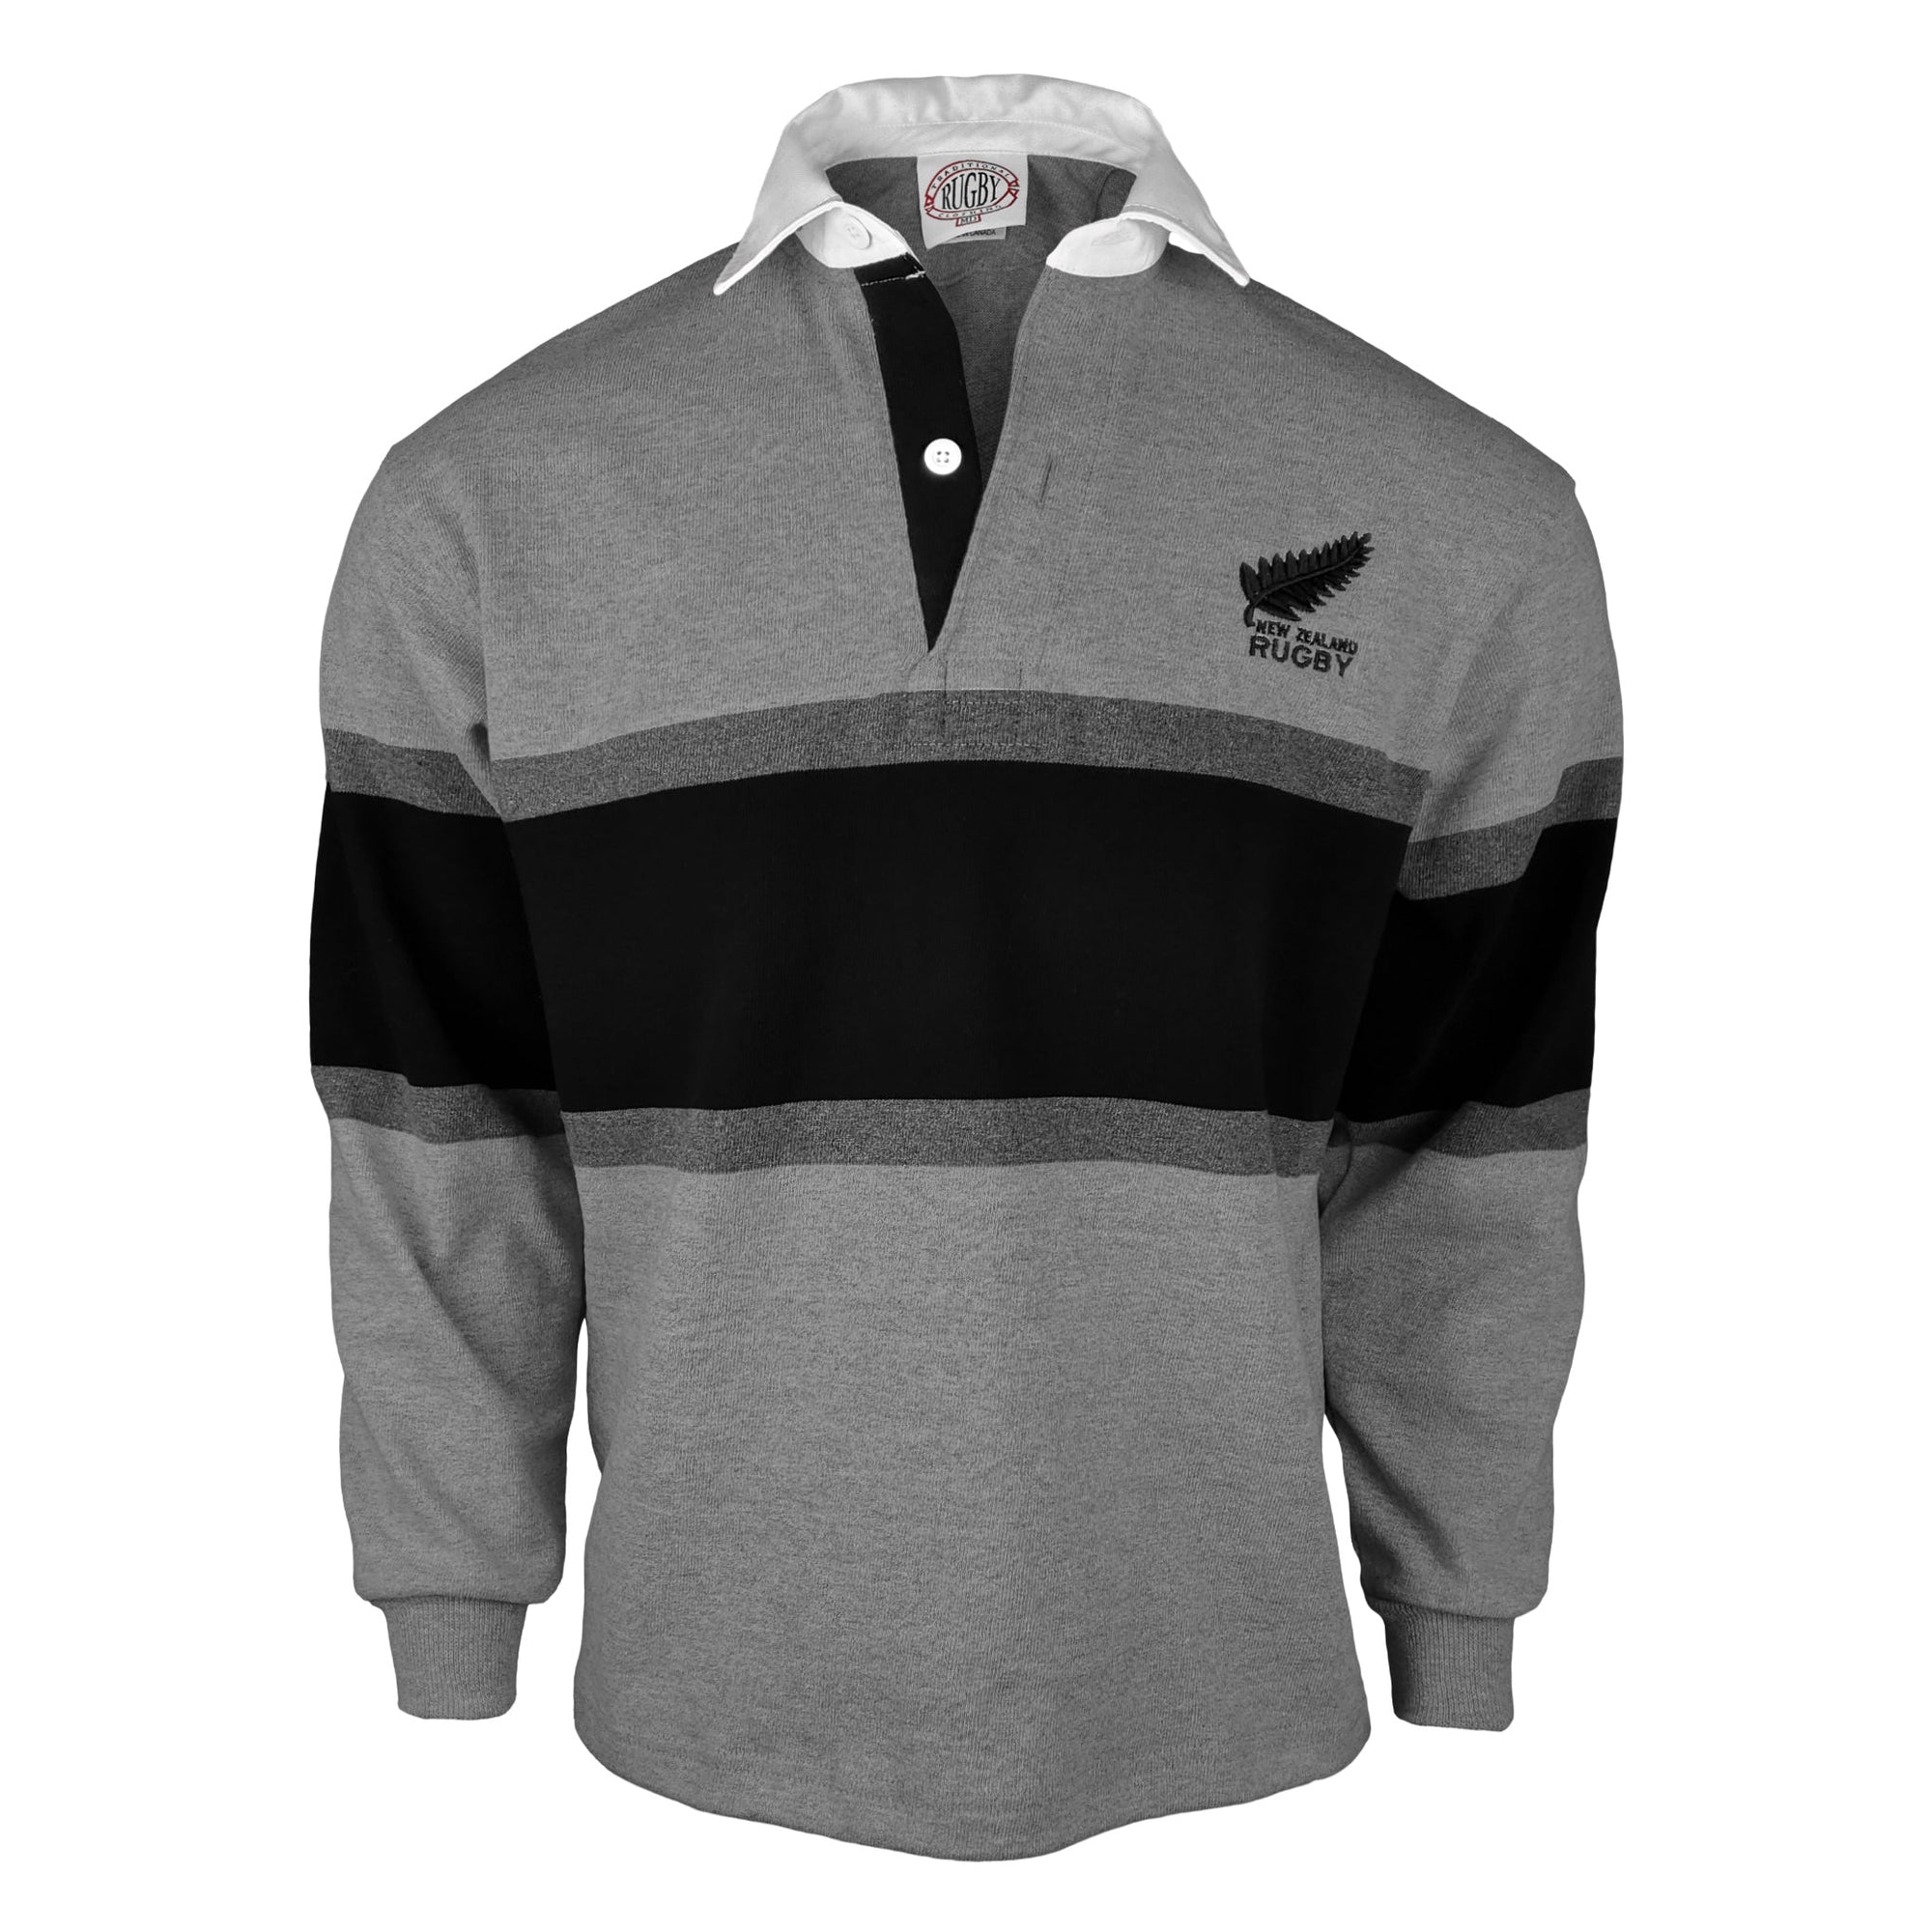 Rugby Imports New Zealand Oxford Stripe Rugby Jersey